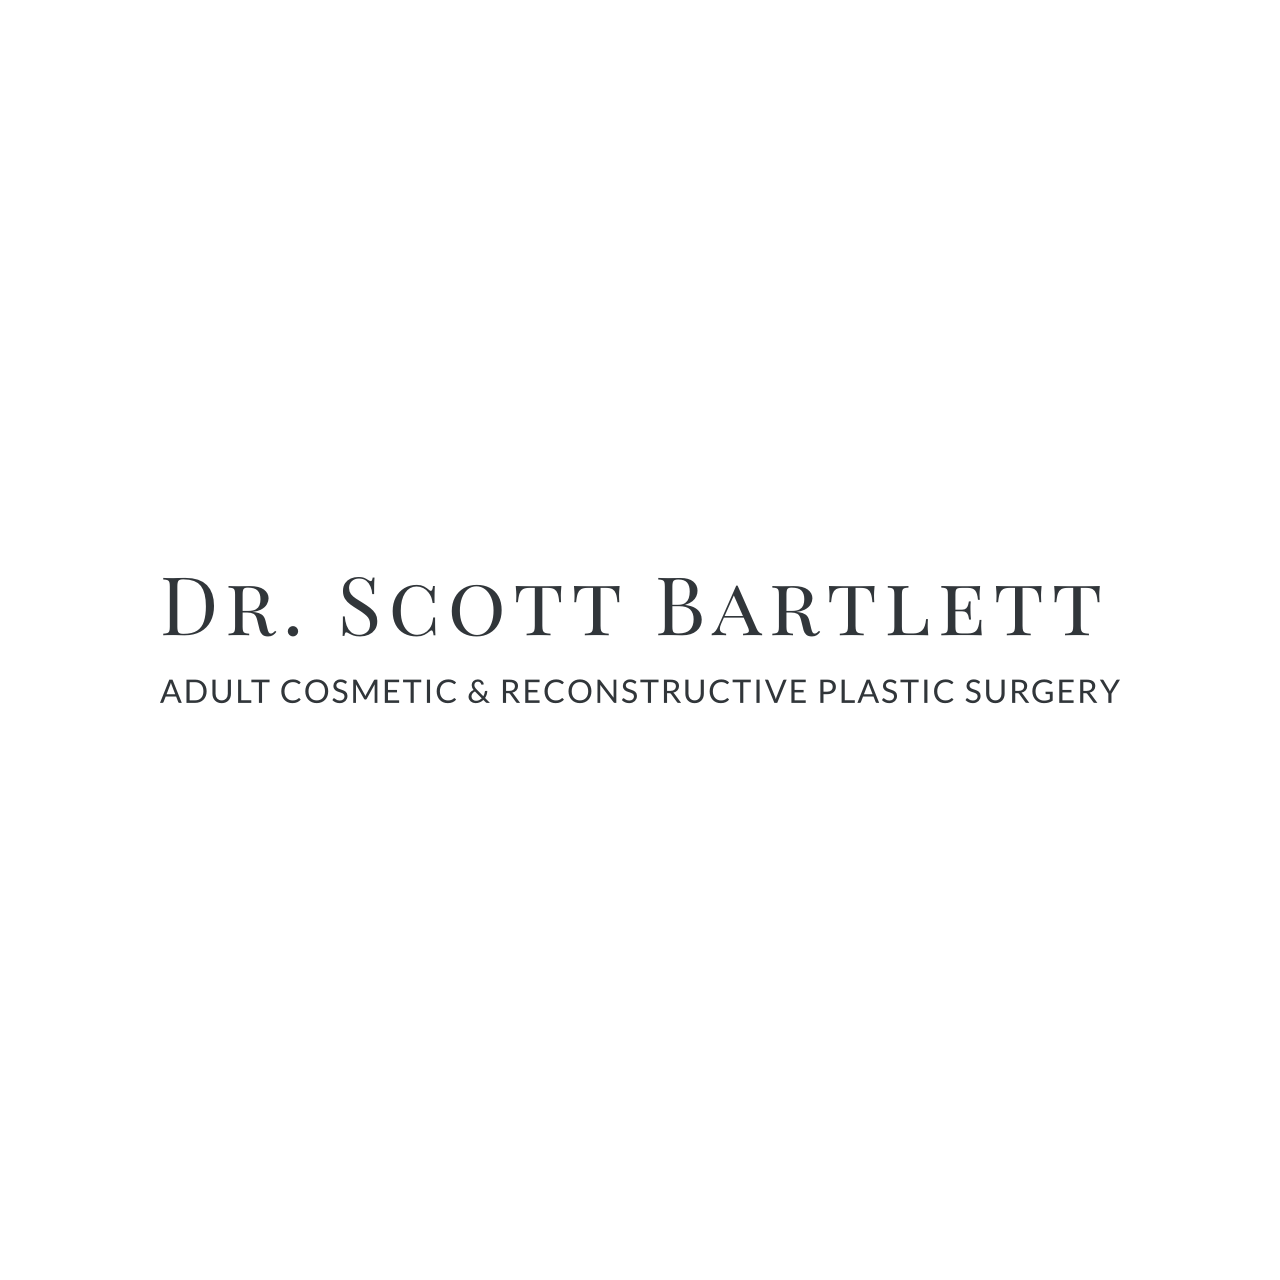 Dr Scott Bartlett Adult Cosmetic and Reconstructive Plastic Surgery